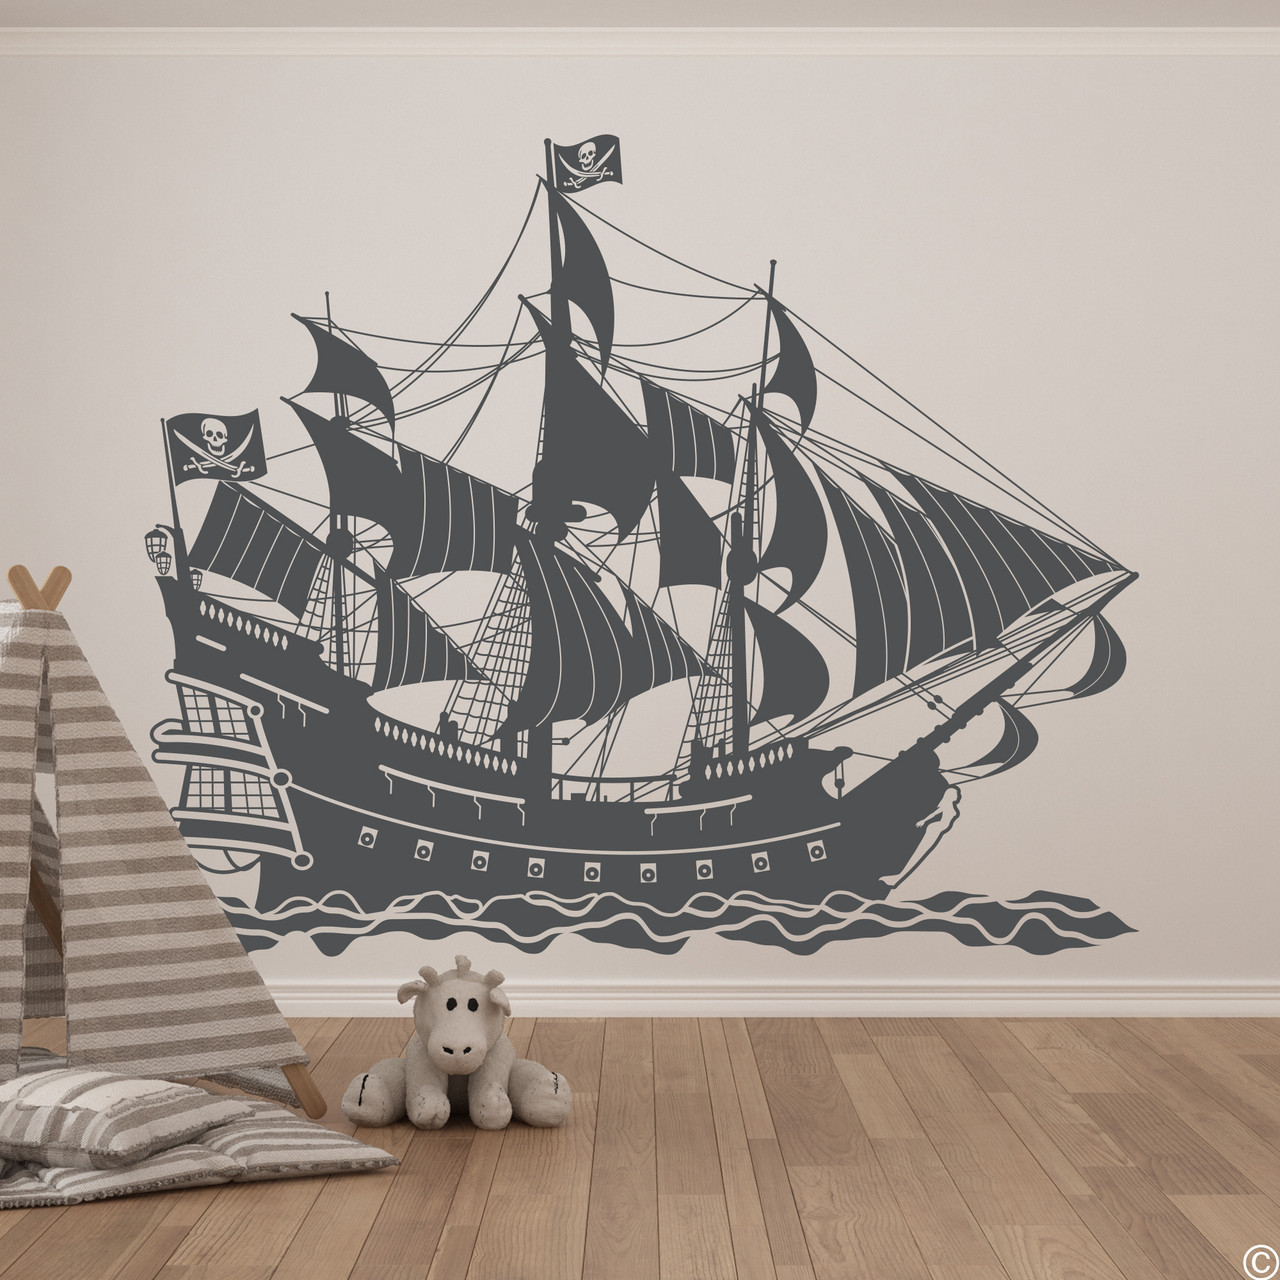 Pirate ship wall decal